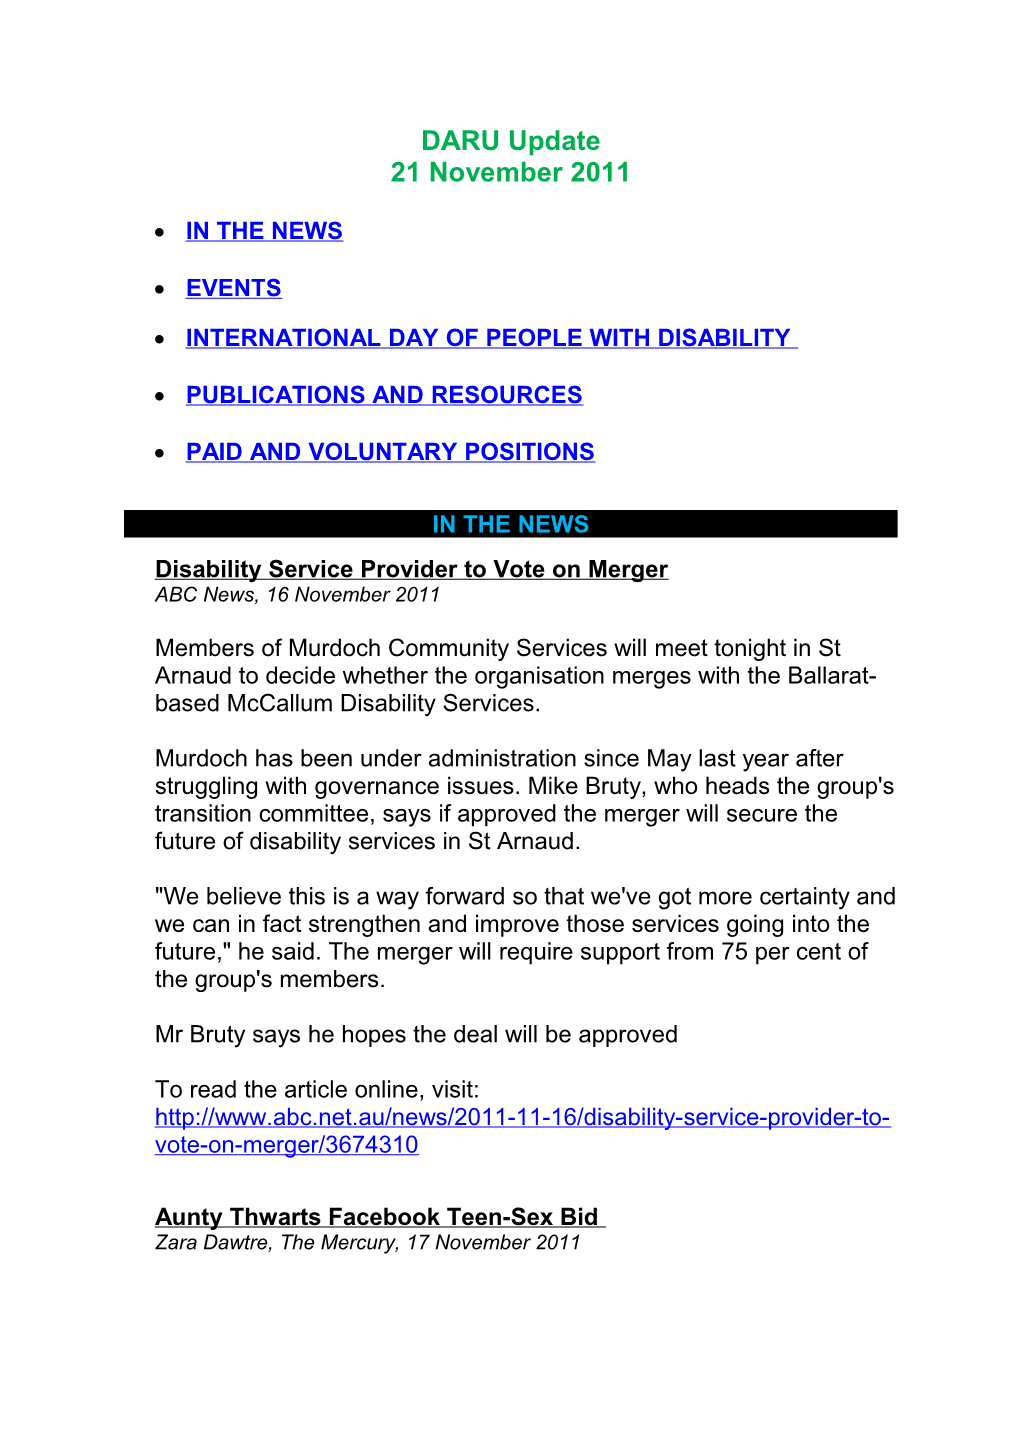 Disability Service Provider to Vote on Merger